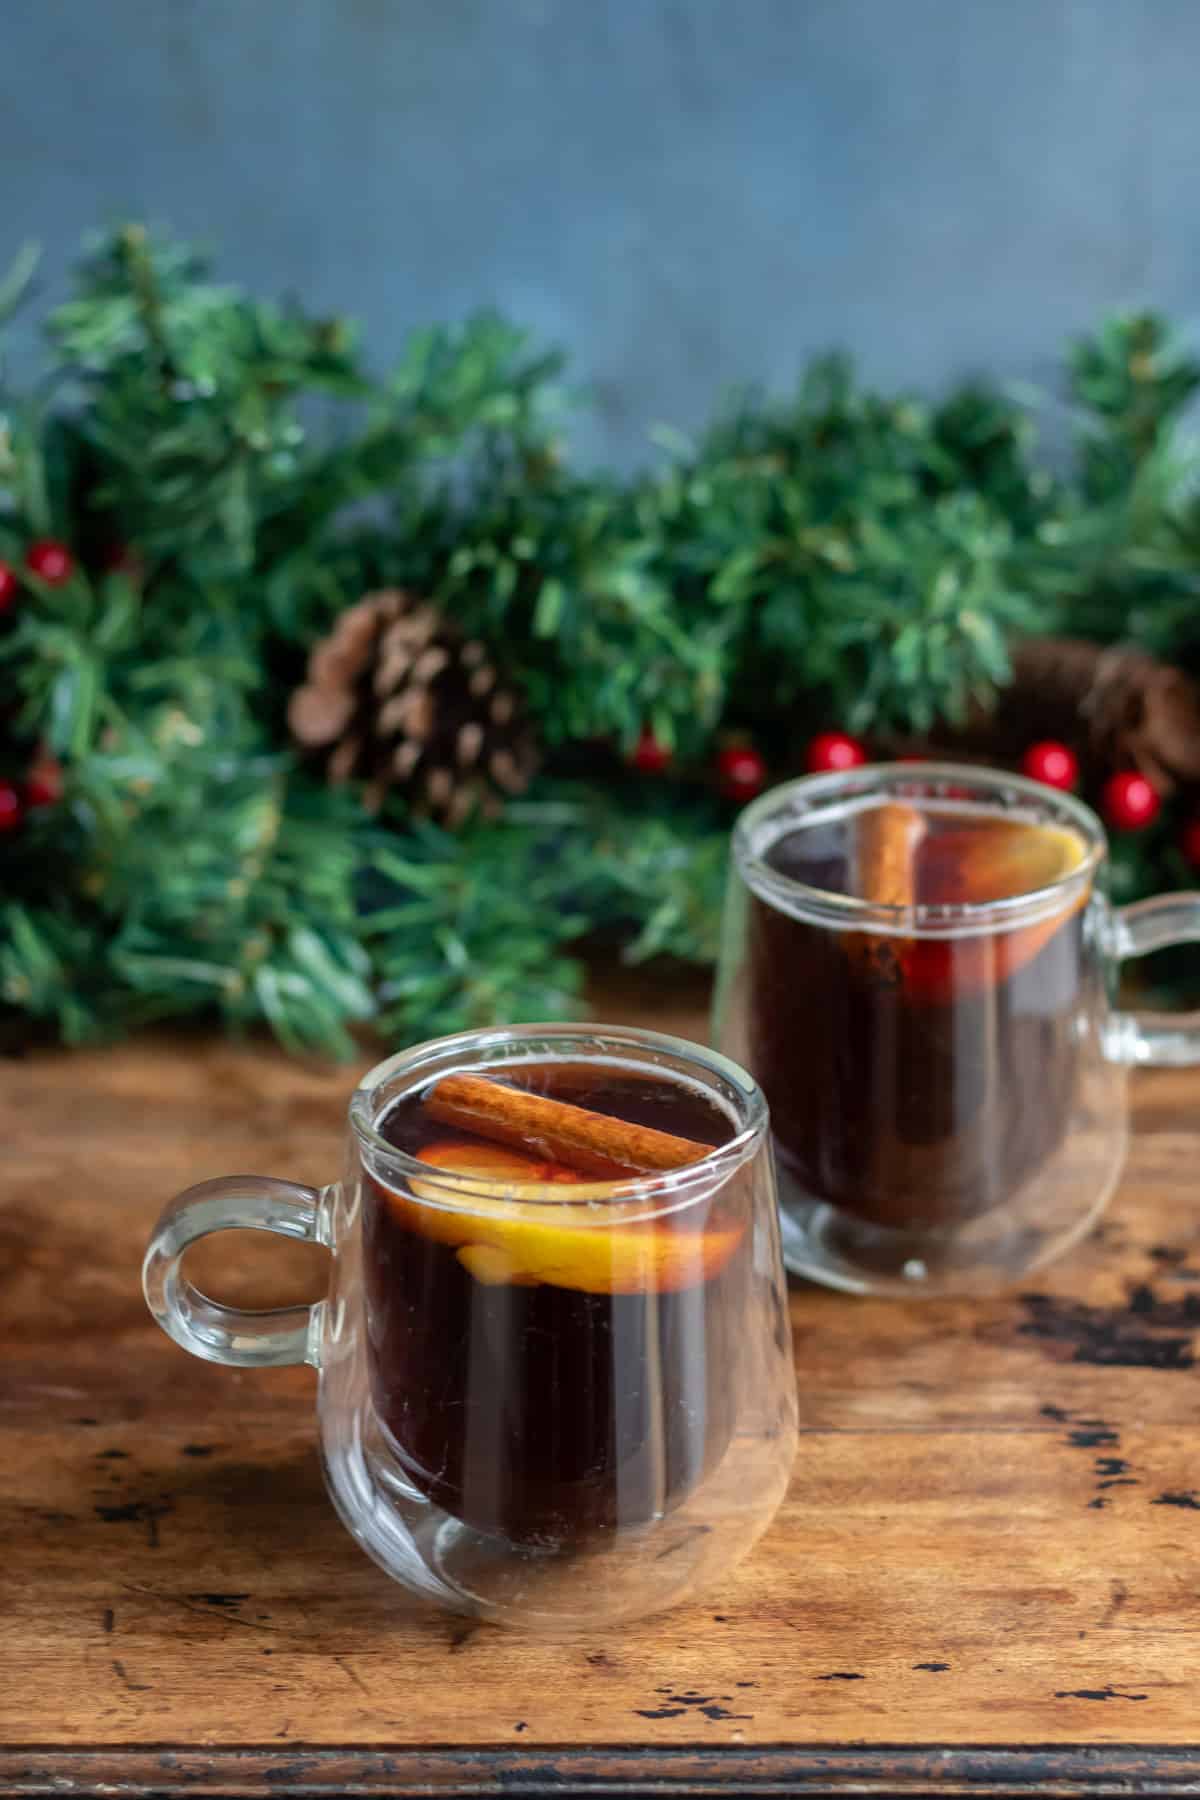 Mugs of gluhbier (hot mulled beer) on a wooden table, with cinnamon sticks and lemon slices.